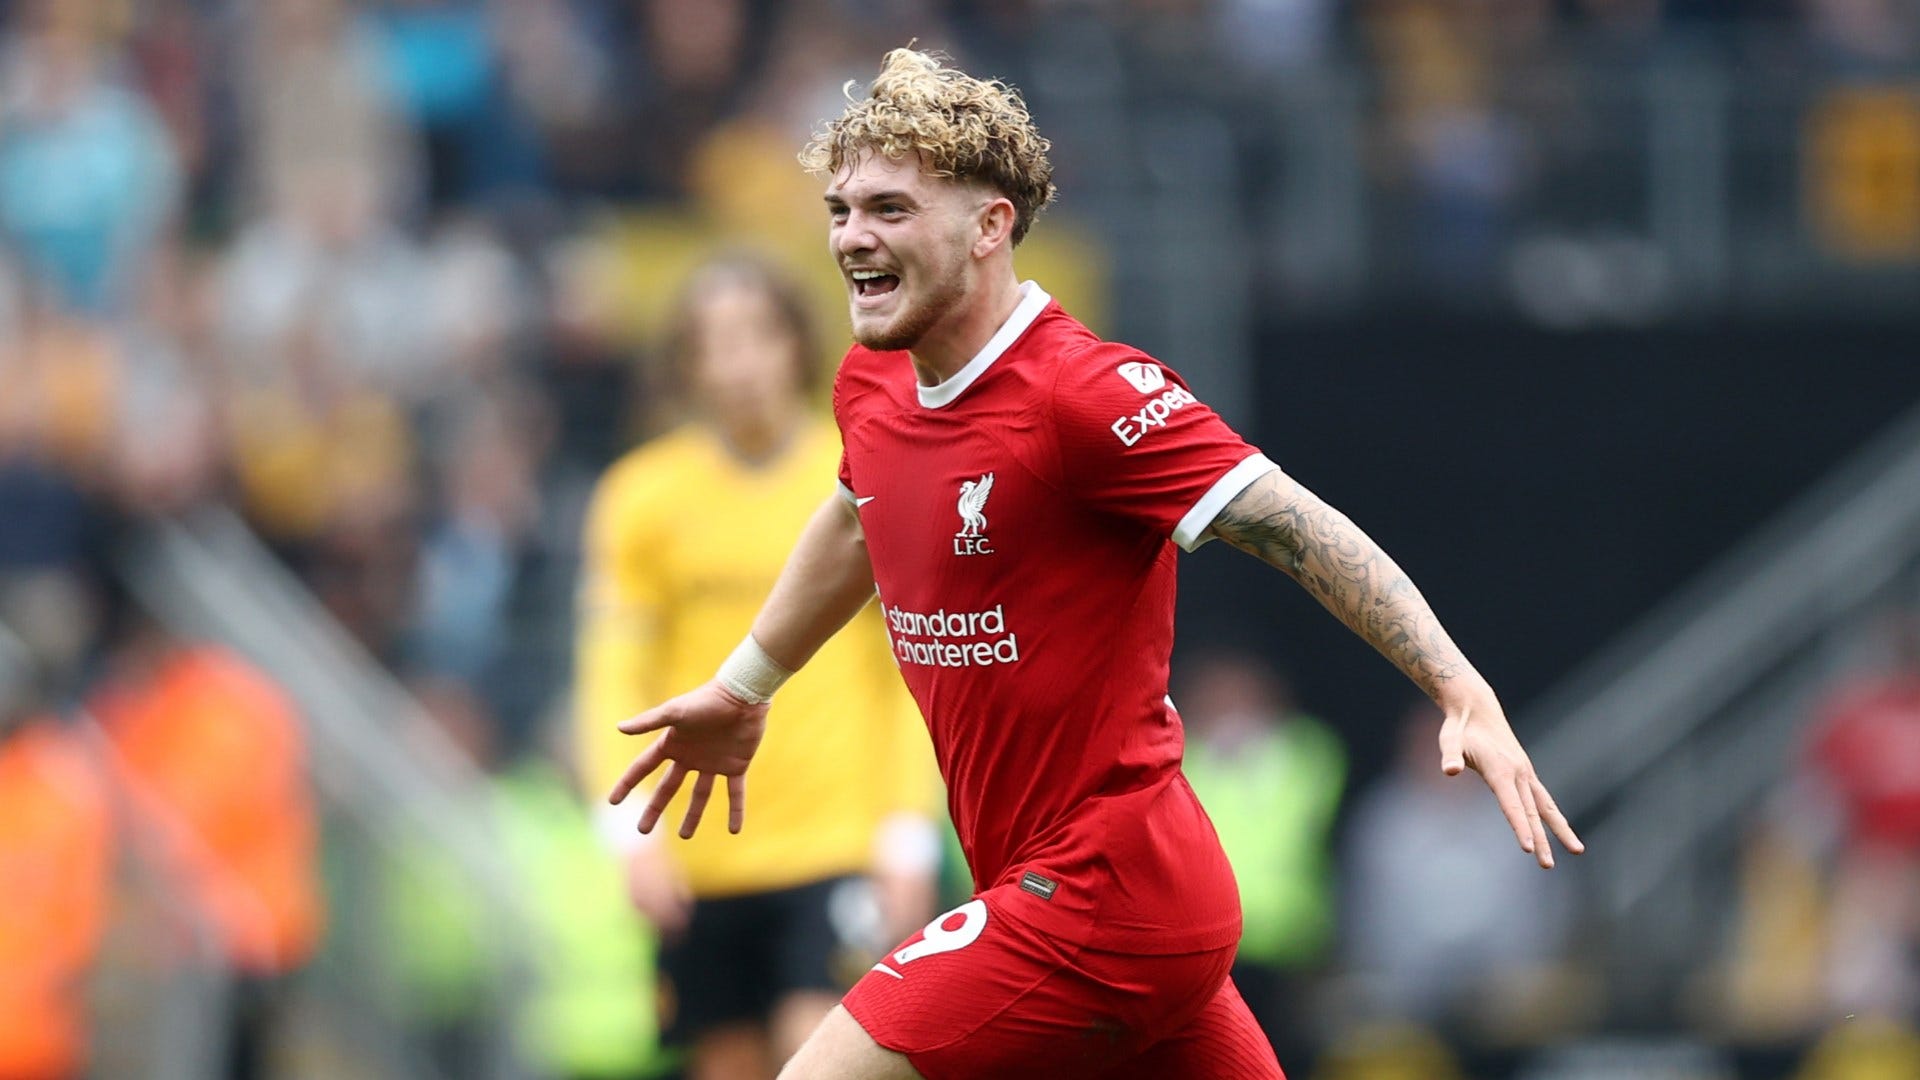 LASK vs Liverpool Live stream, TV channel, kick-off time and where to watch Goal US